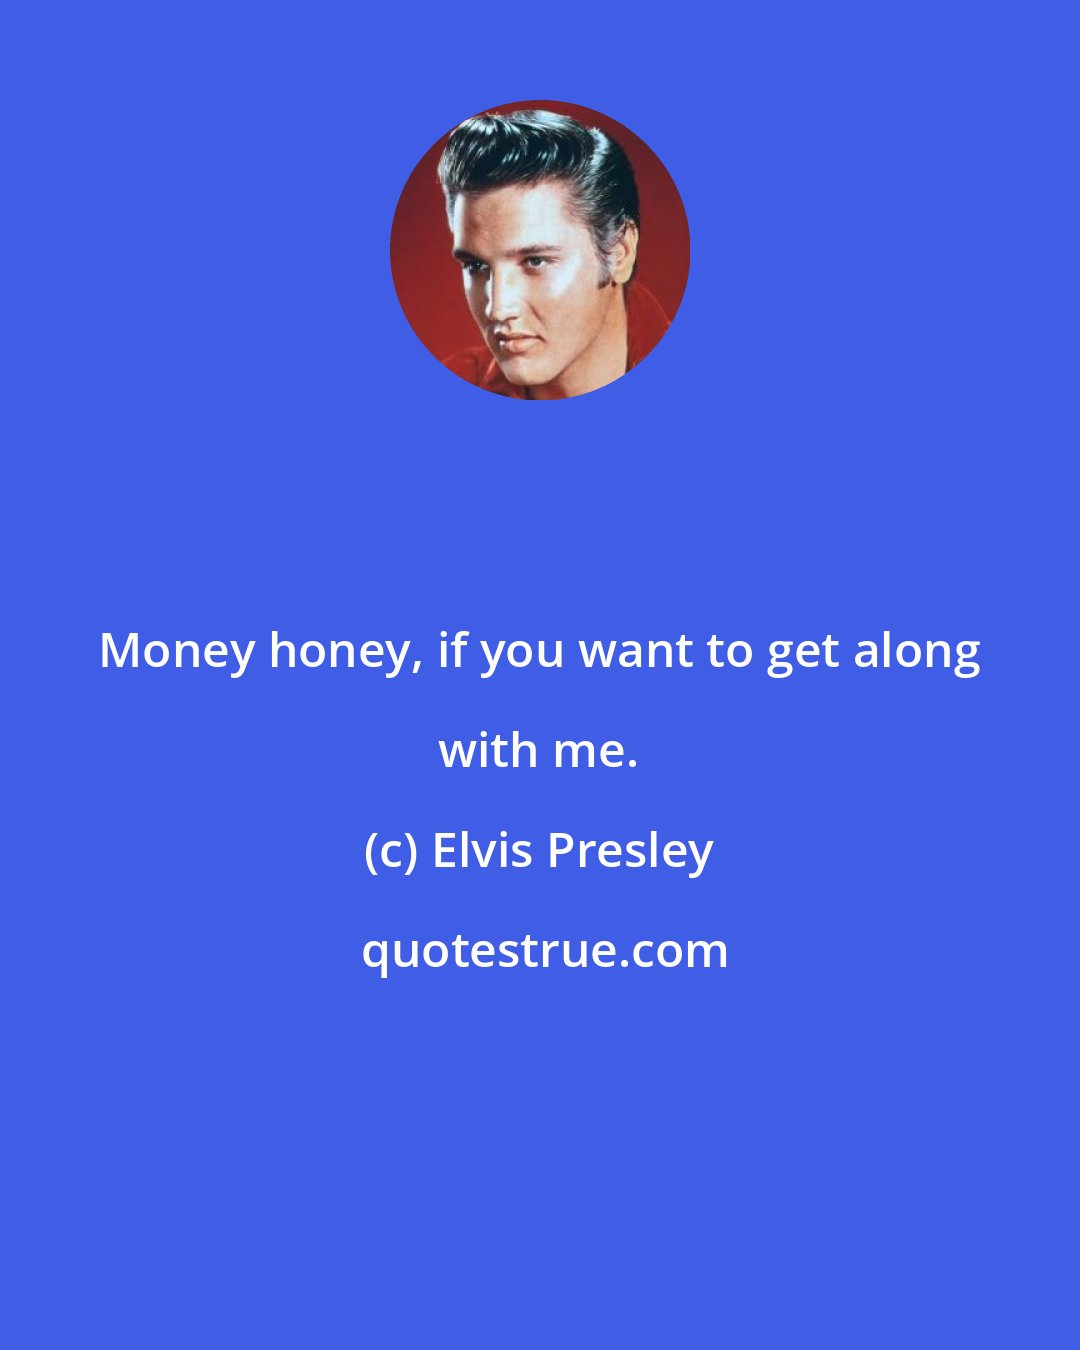 Elvis Presley: Money honey, if you want to get along with me.